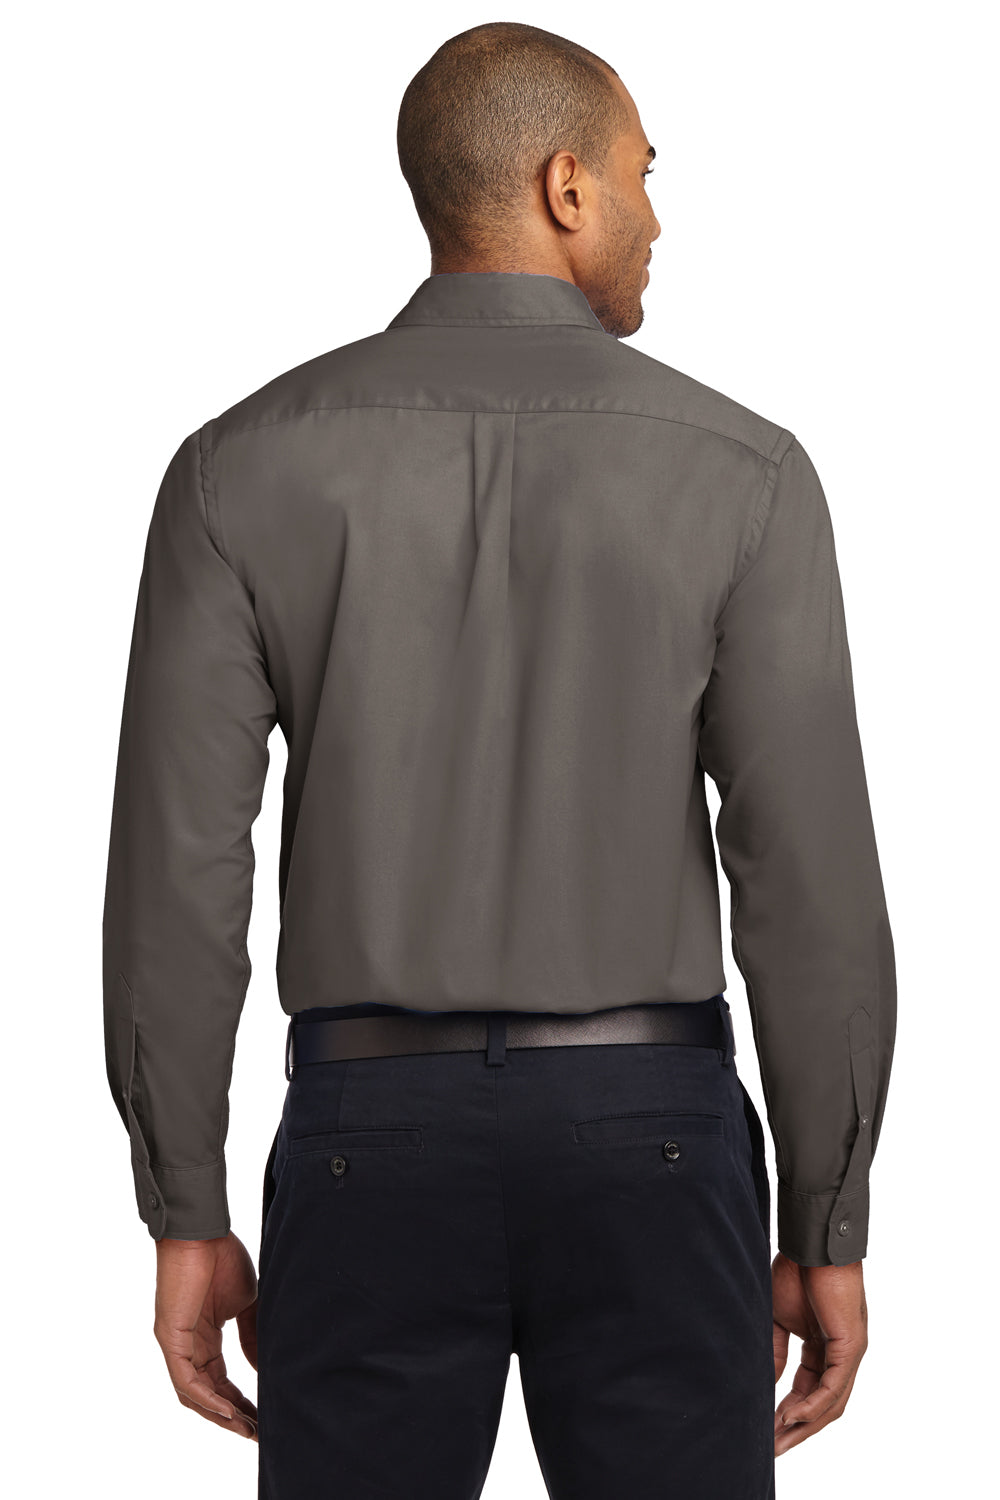 Port Authority S608/TLS608/S608ES Mens Easy Care Wrinkle Resistant Long Sleeve Button Down Shirt w/ Pocket Bark Brown Back